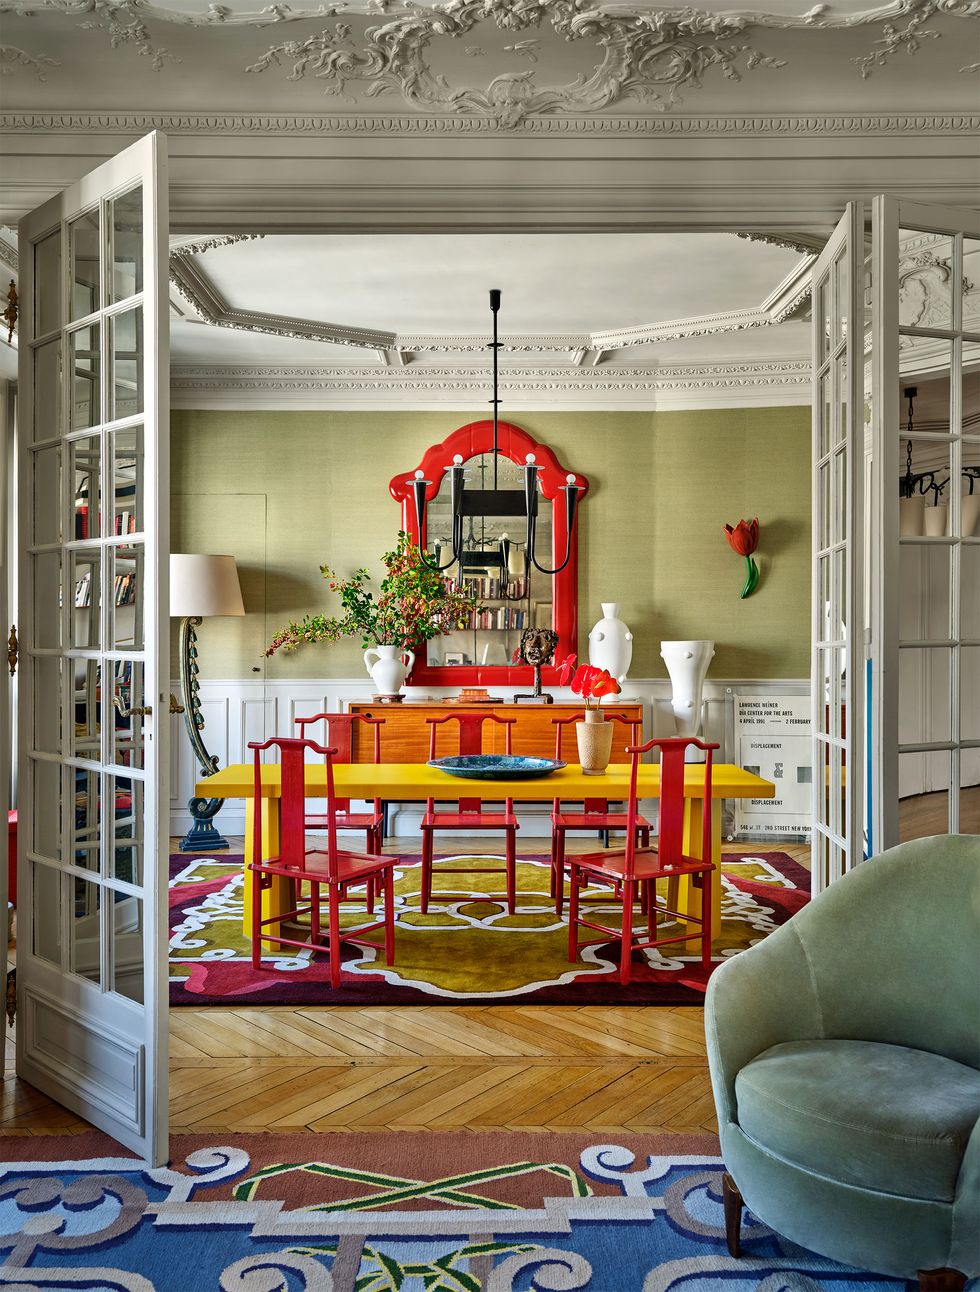 french doors open to a dining room with a bright yellow table and five red chairs, a sideboard with vases, a large red framed mirror, red flower sconce, floor lamp, burgundy and green patterned rug